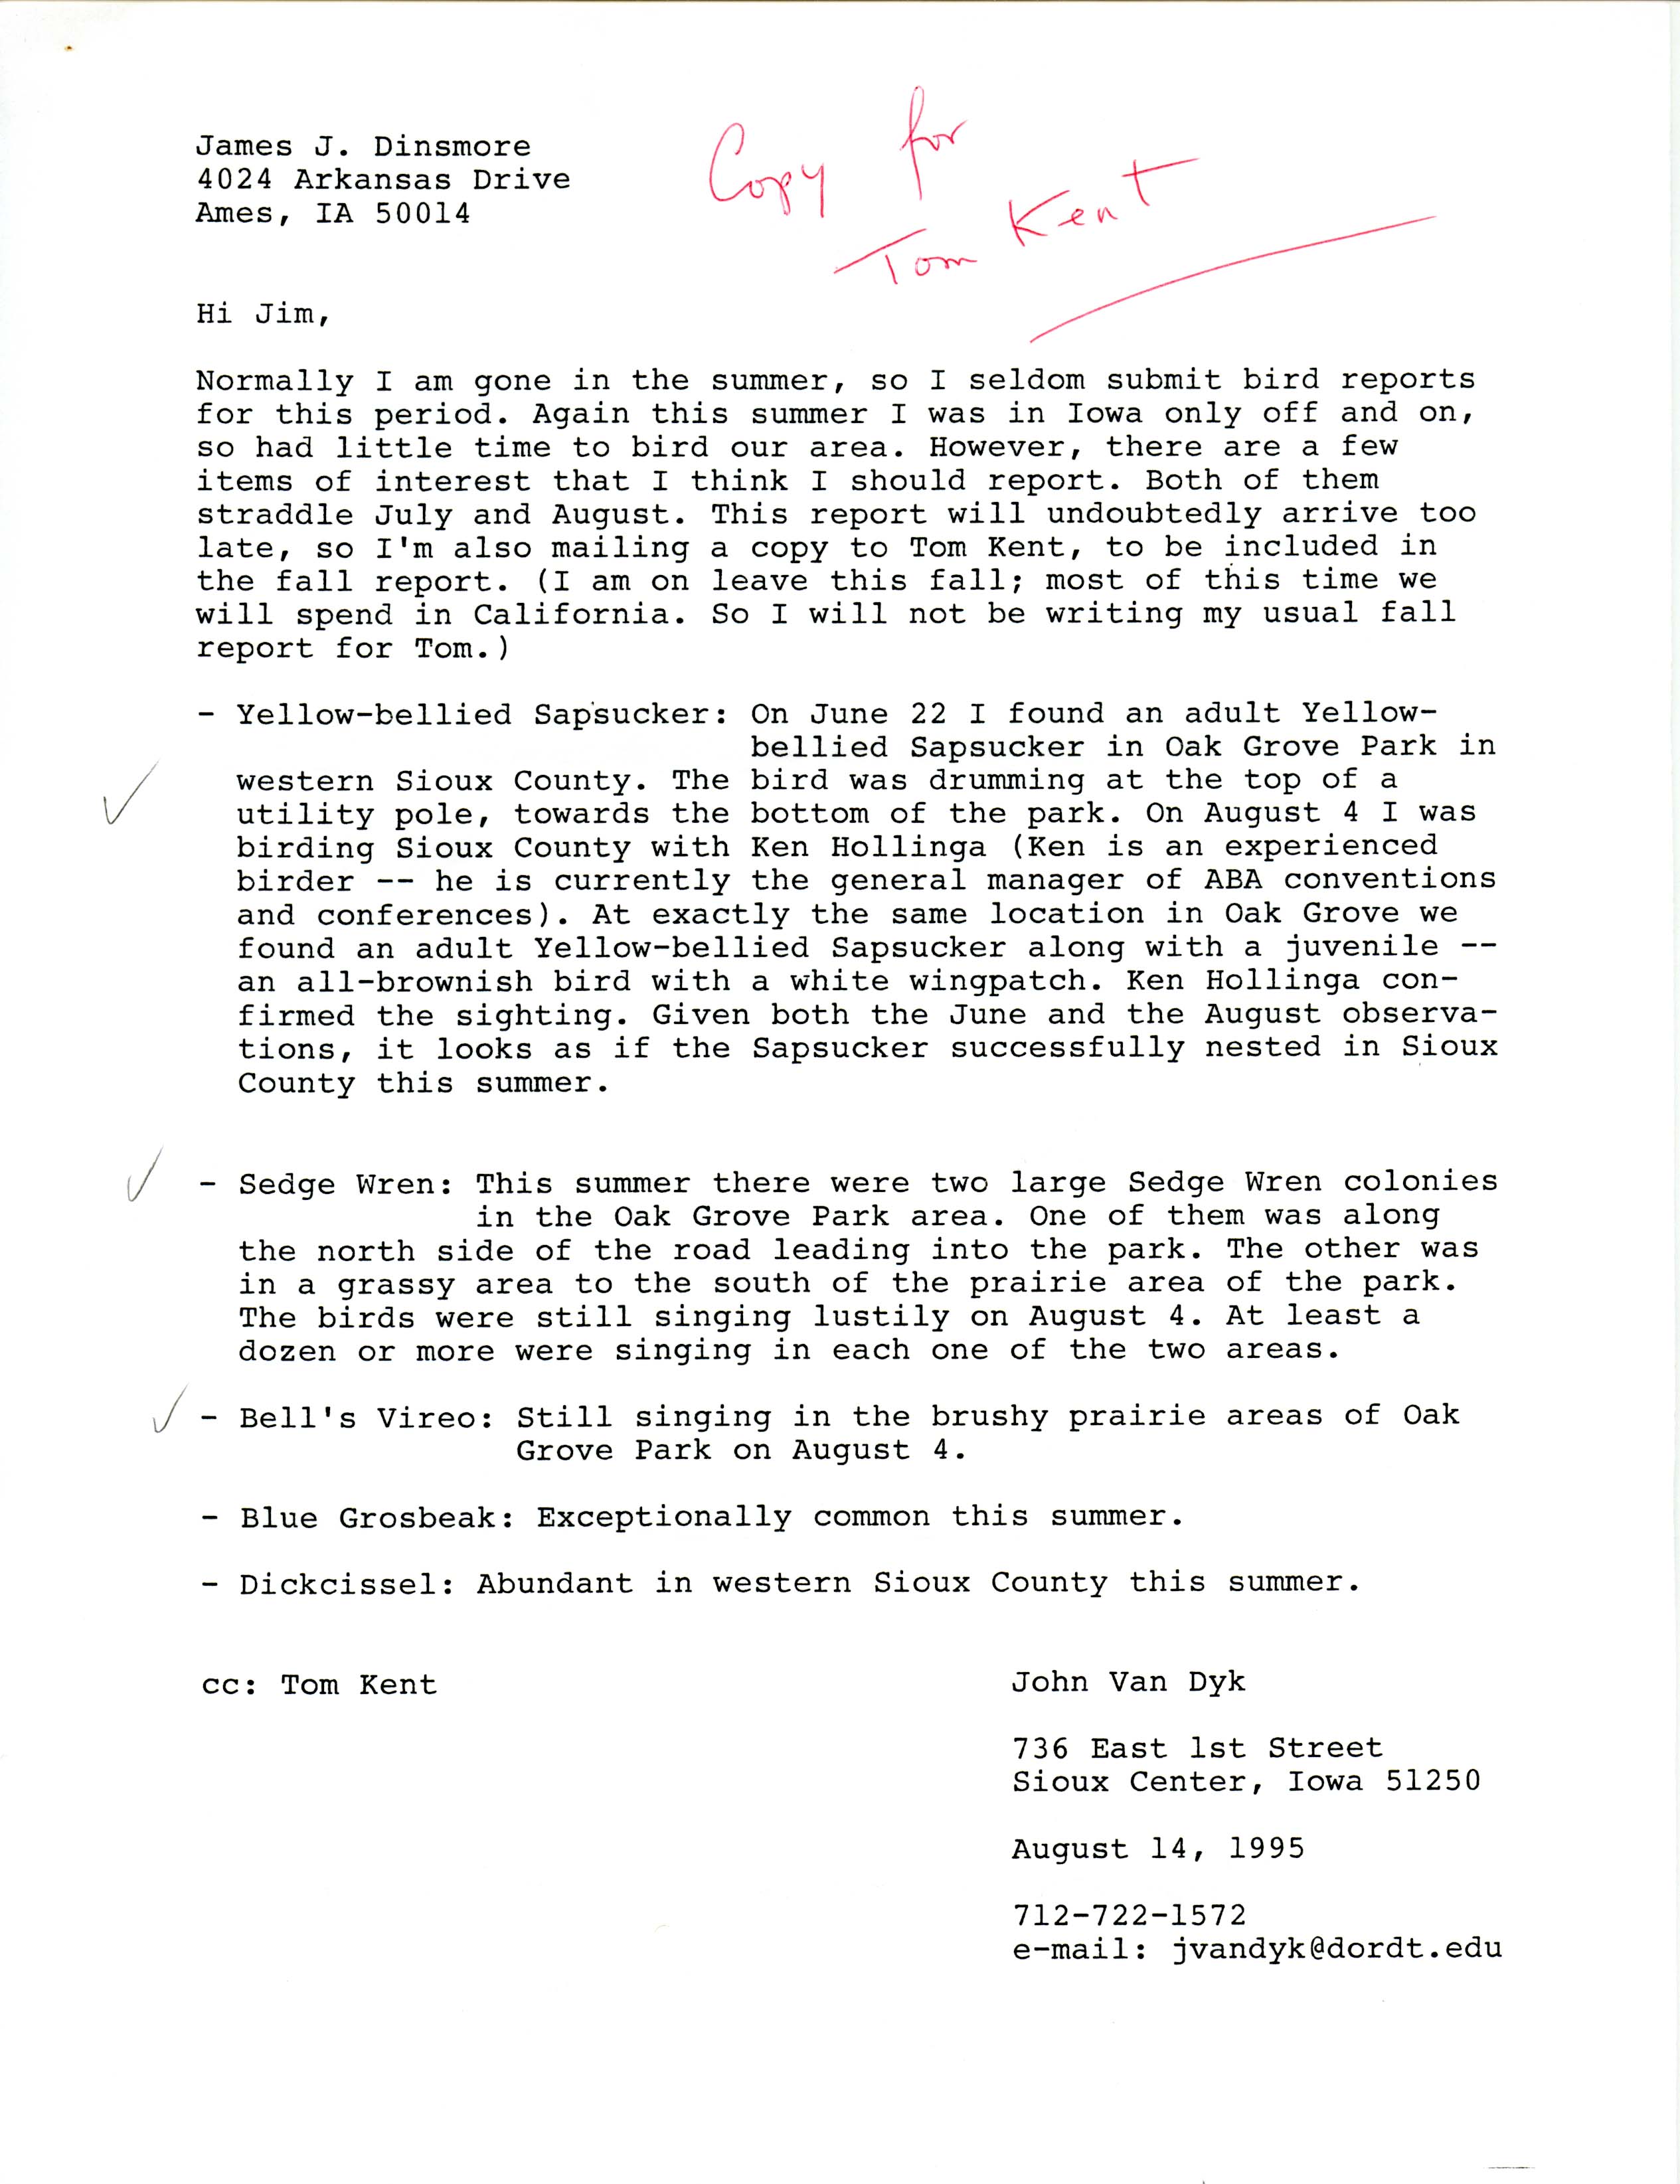 Field notes and Jon Van Dyk letter to James J. Dinsmore, August 14, 1995